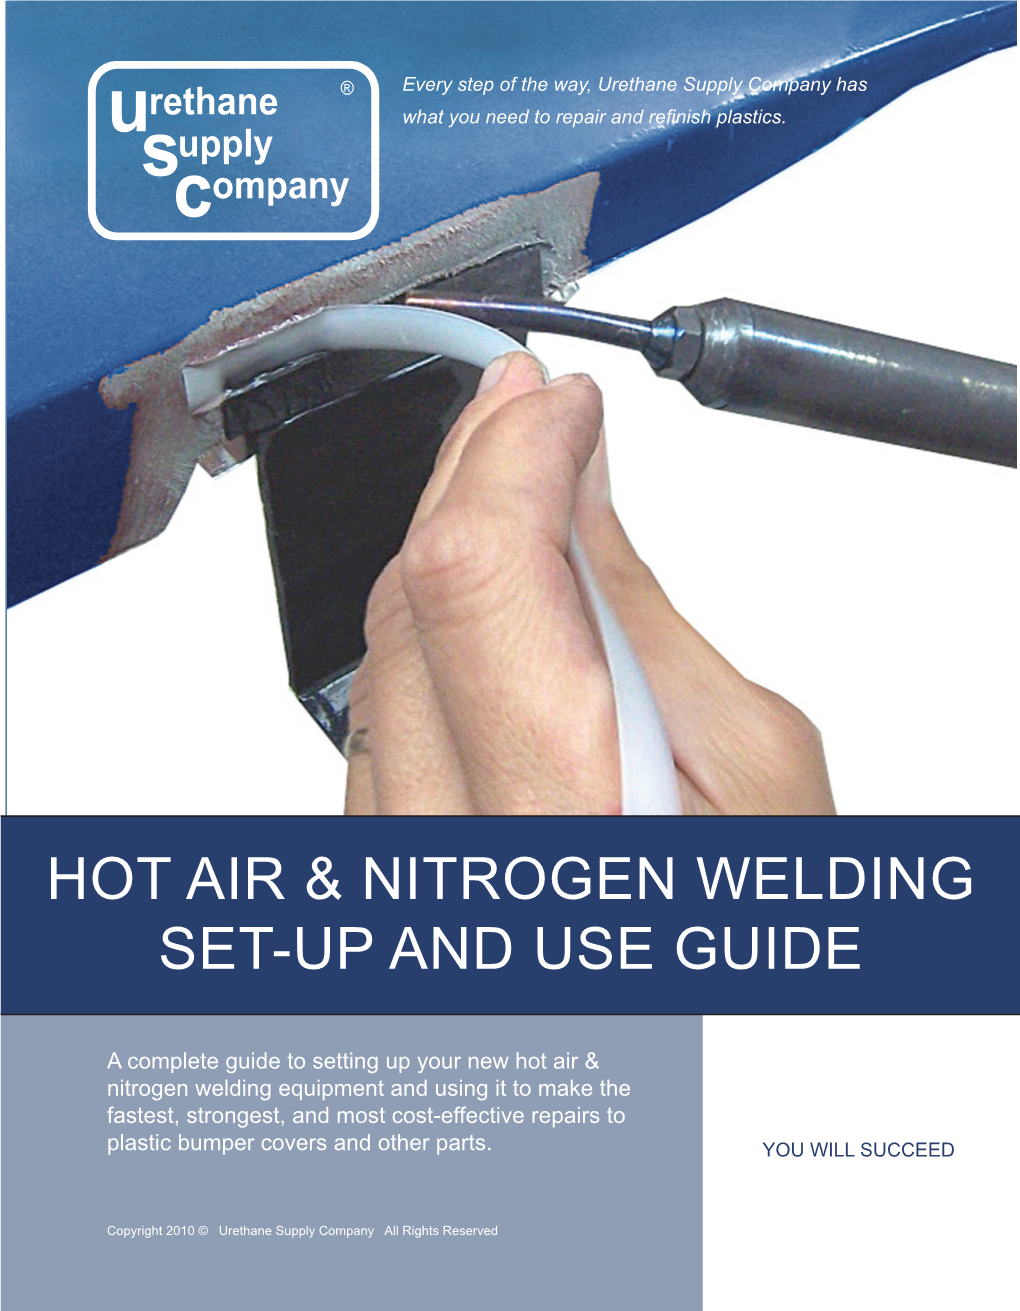 Hot Air & Nitrogen Welding Set-Up and Use Guide